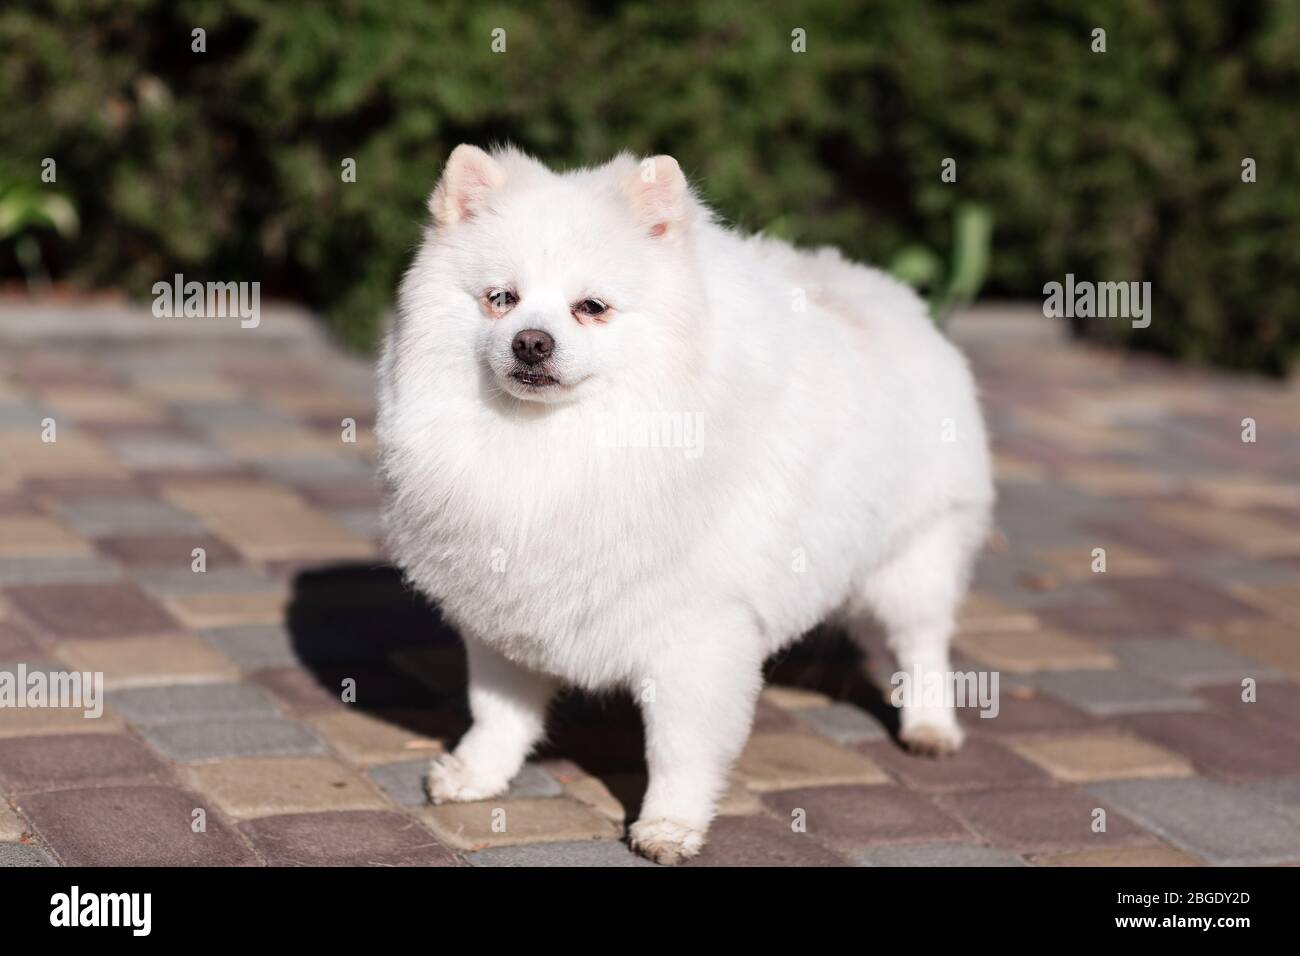 White small pomeranian spitz sitting on the lawn outdoor in the park Stock Photo